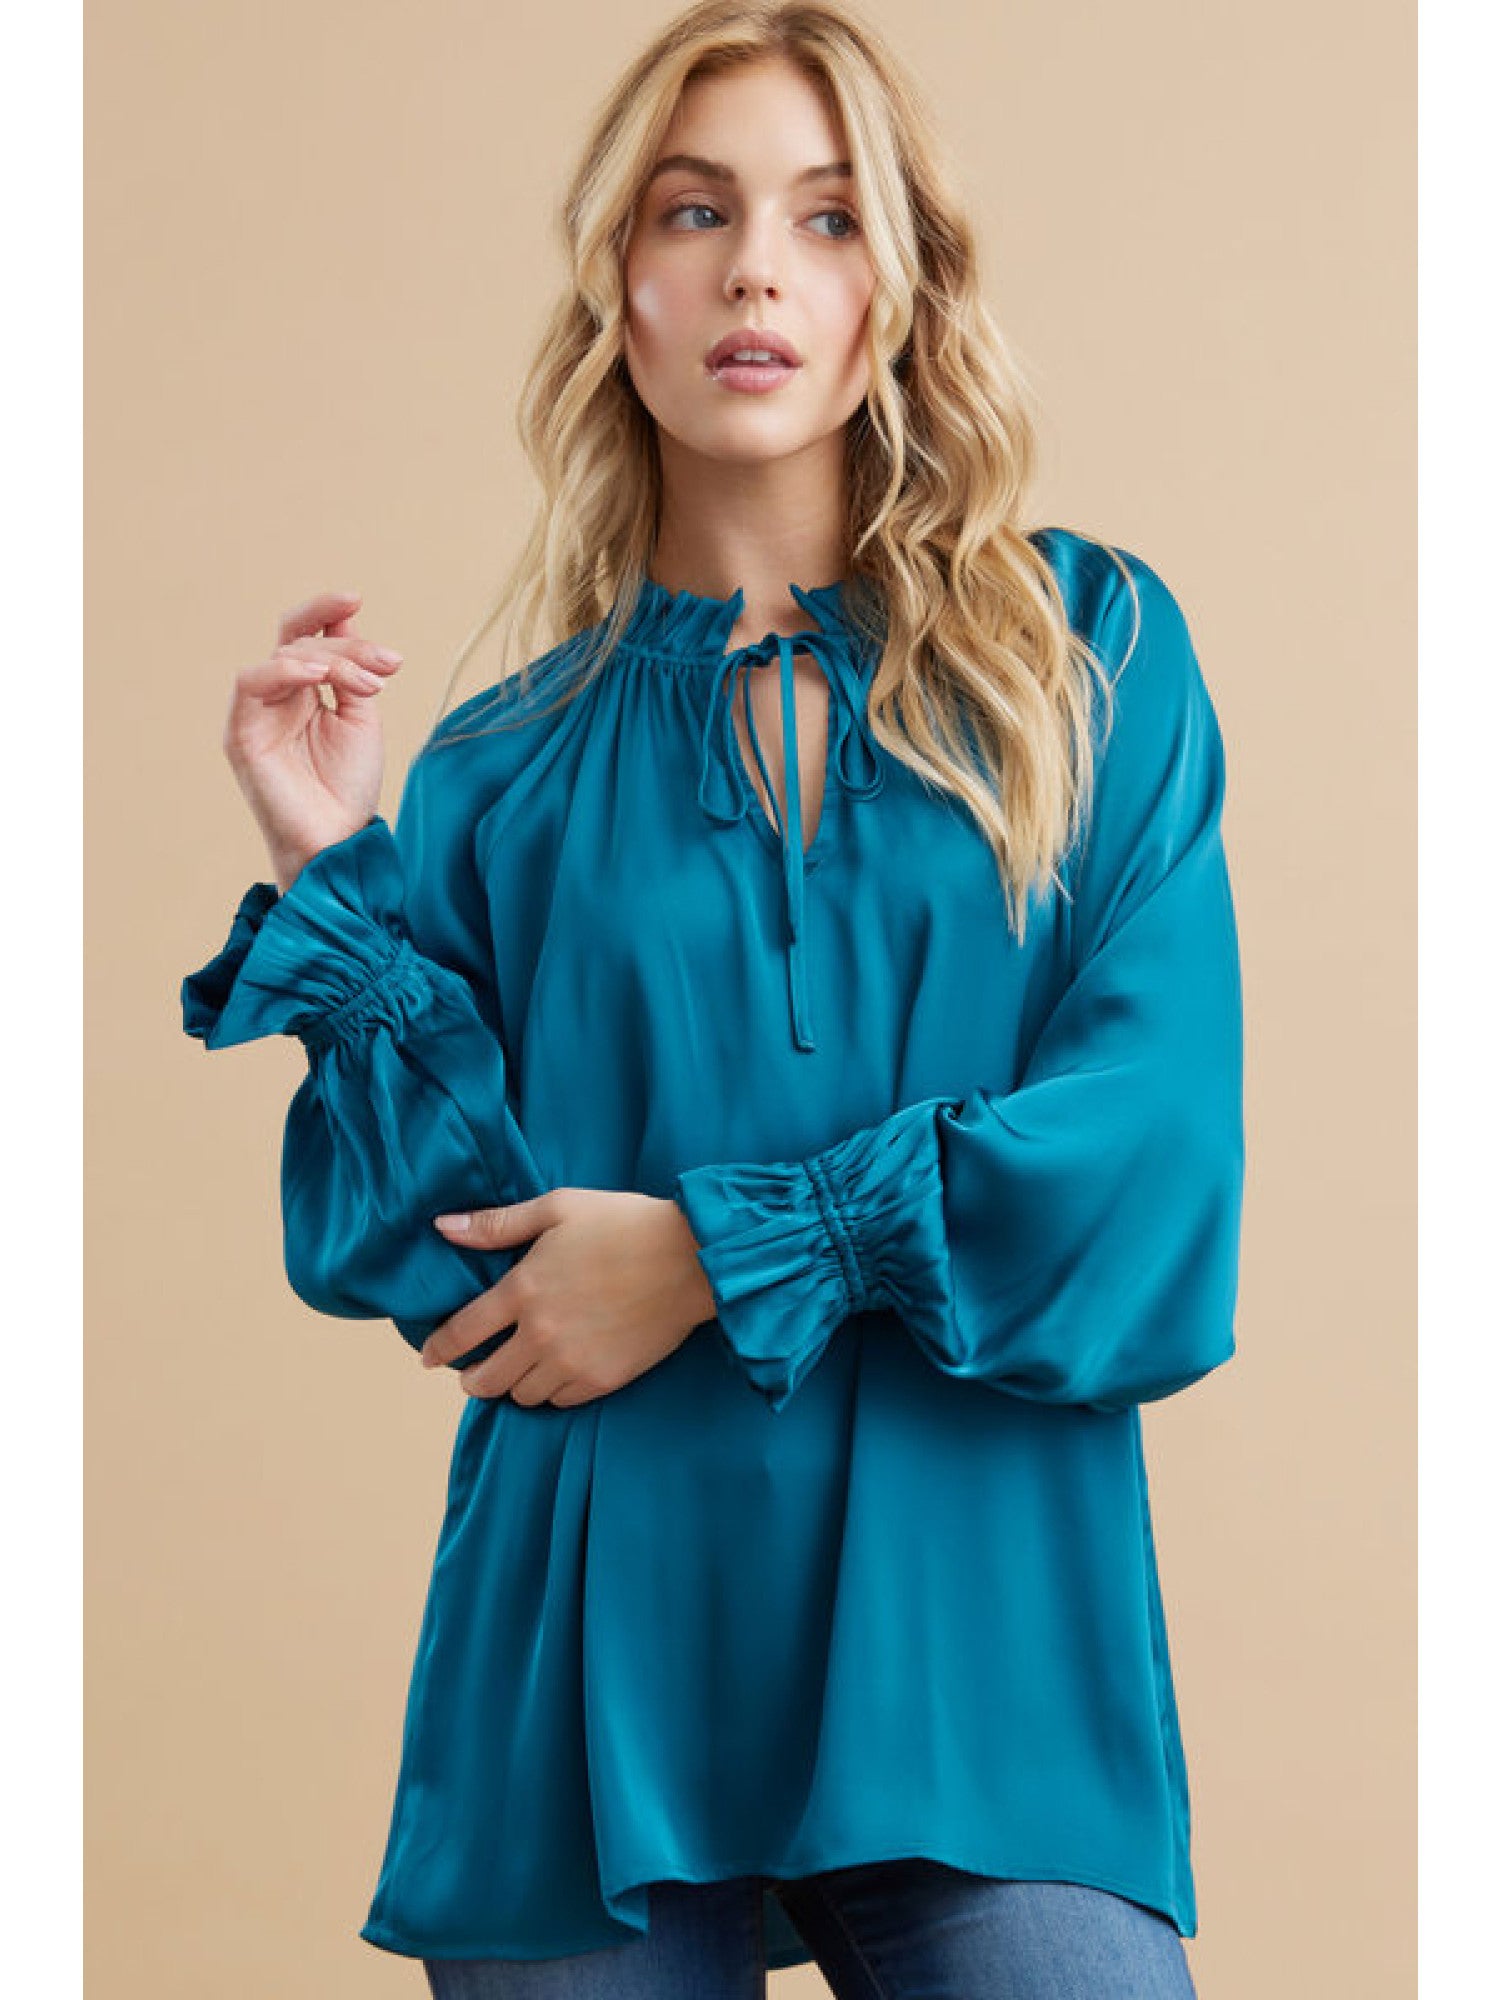 Teal Satin Top with Self Tie